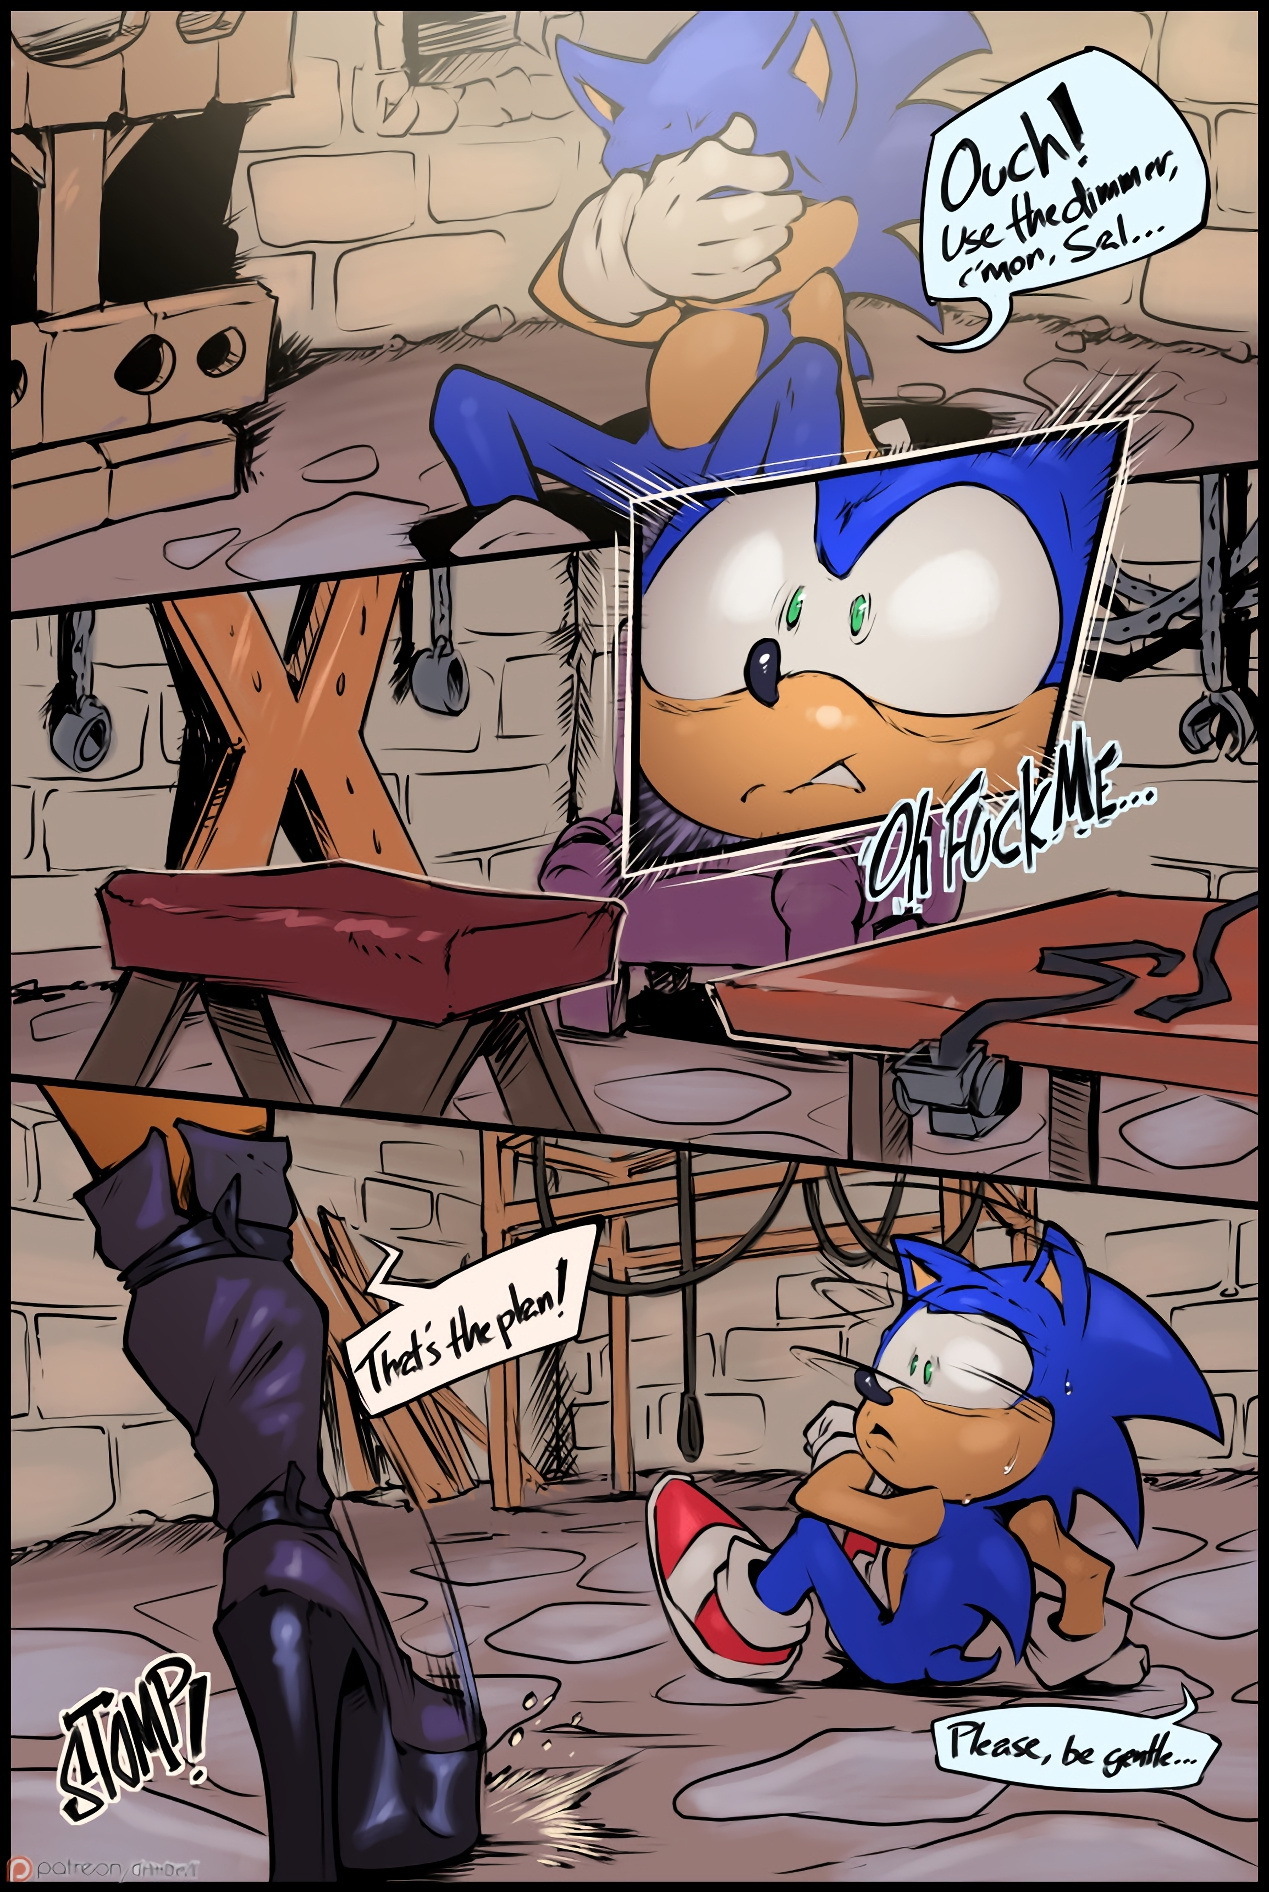 It Begins! Is back - Page 27